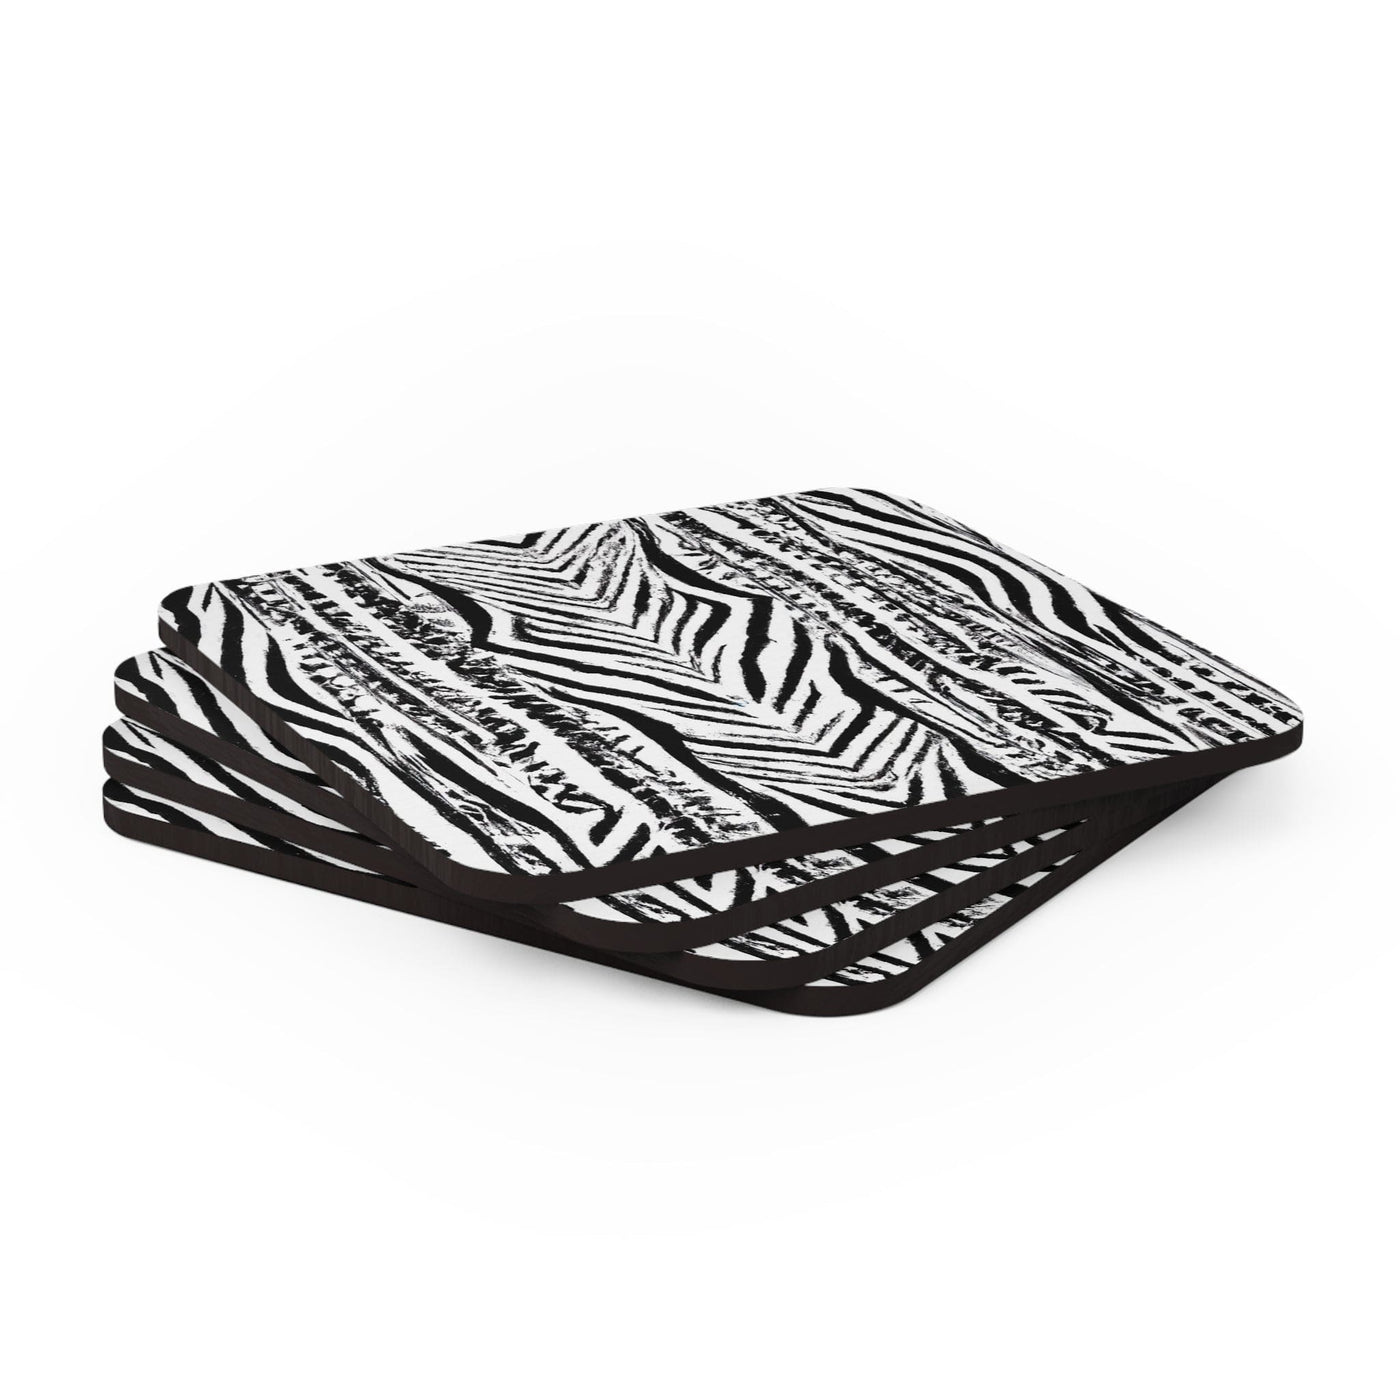 Handcrafted Square Coaster Set Of 4 For Drinks And Cups Black White Native